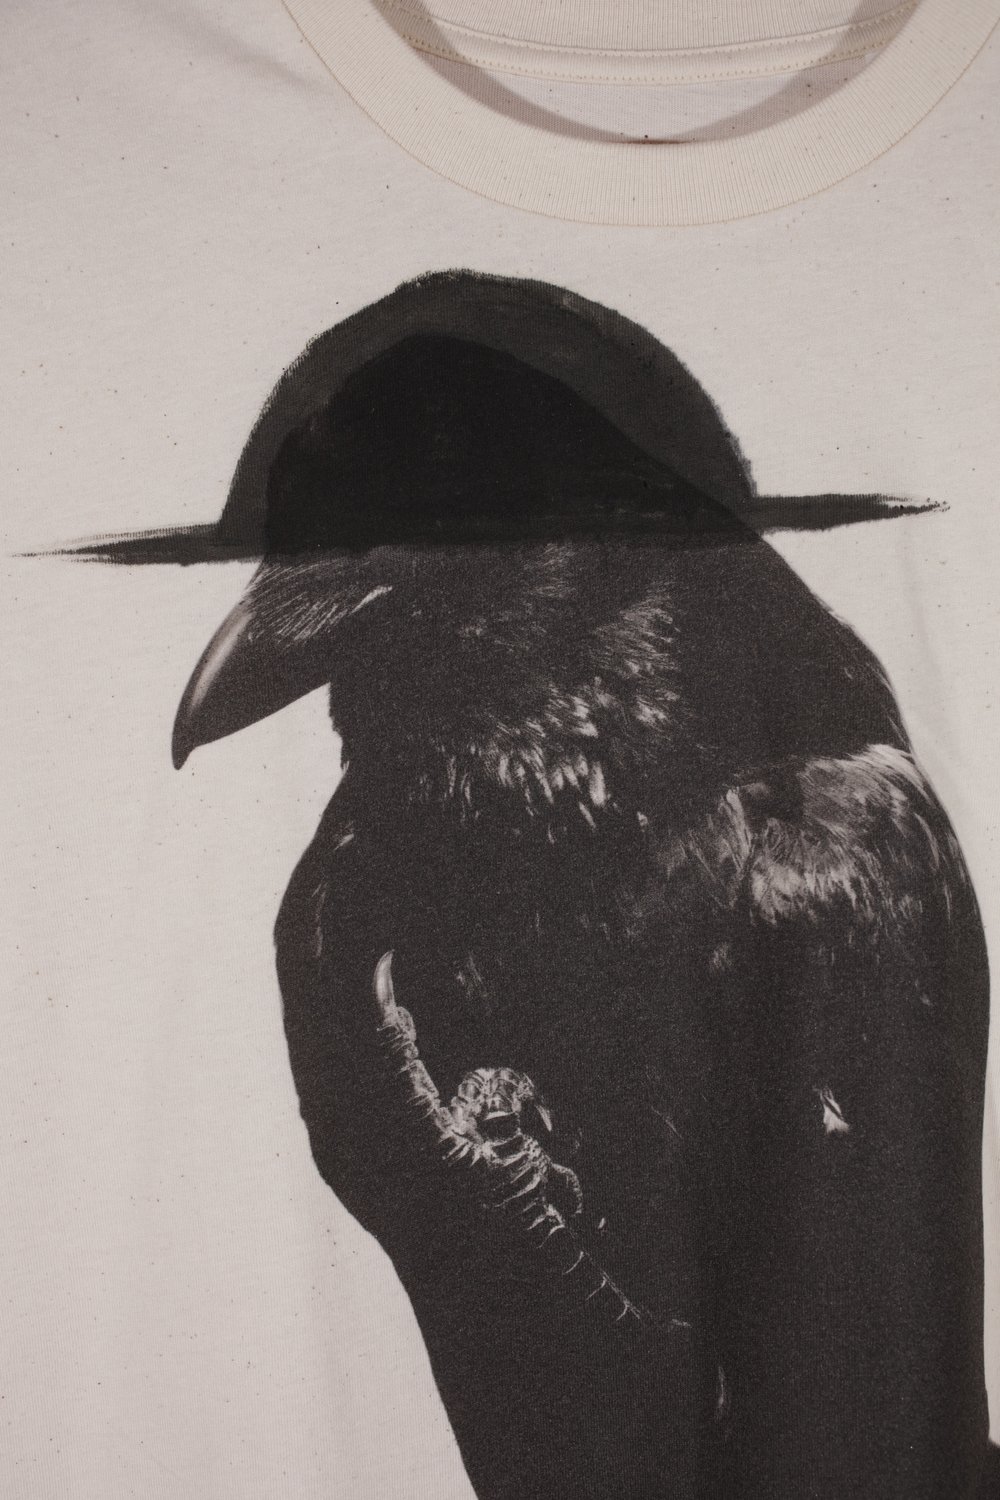 Crow with black hat